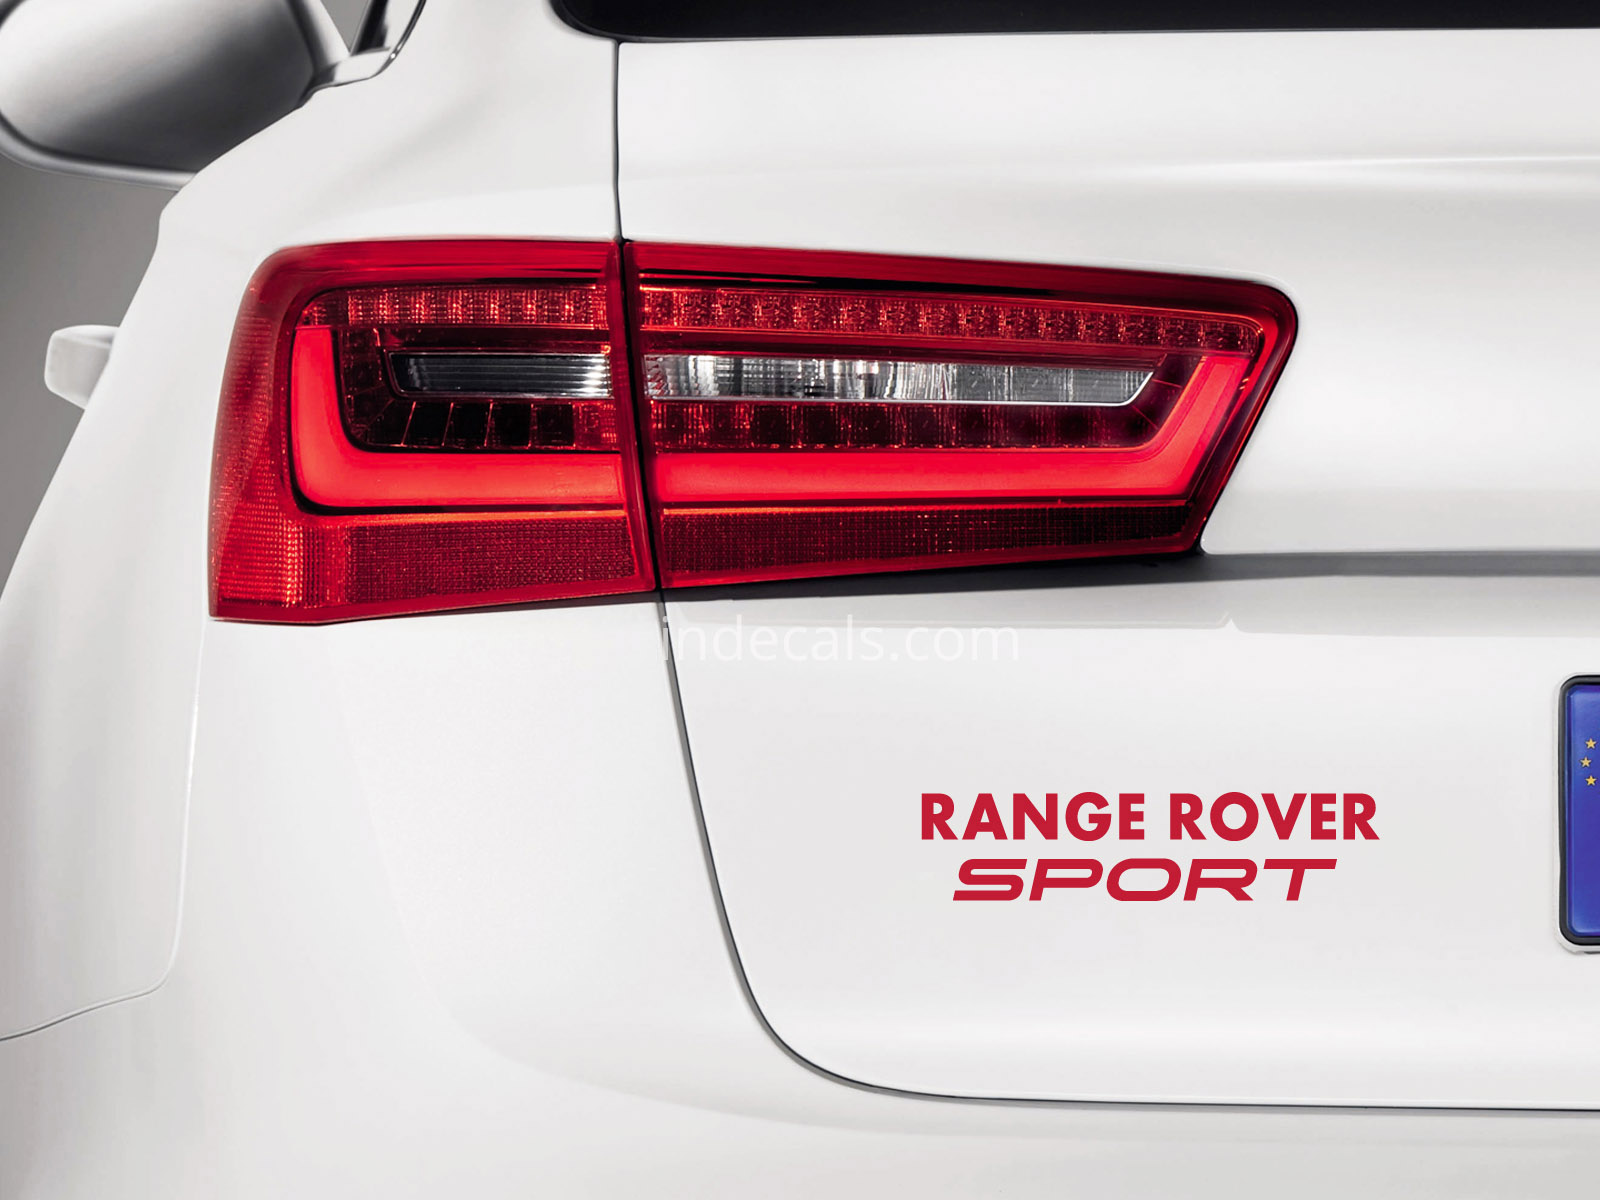 1 x Range Rover Sports Sticker for Trunk - Red